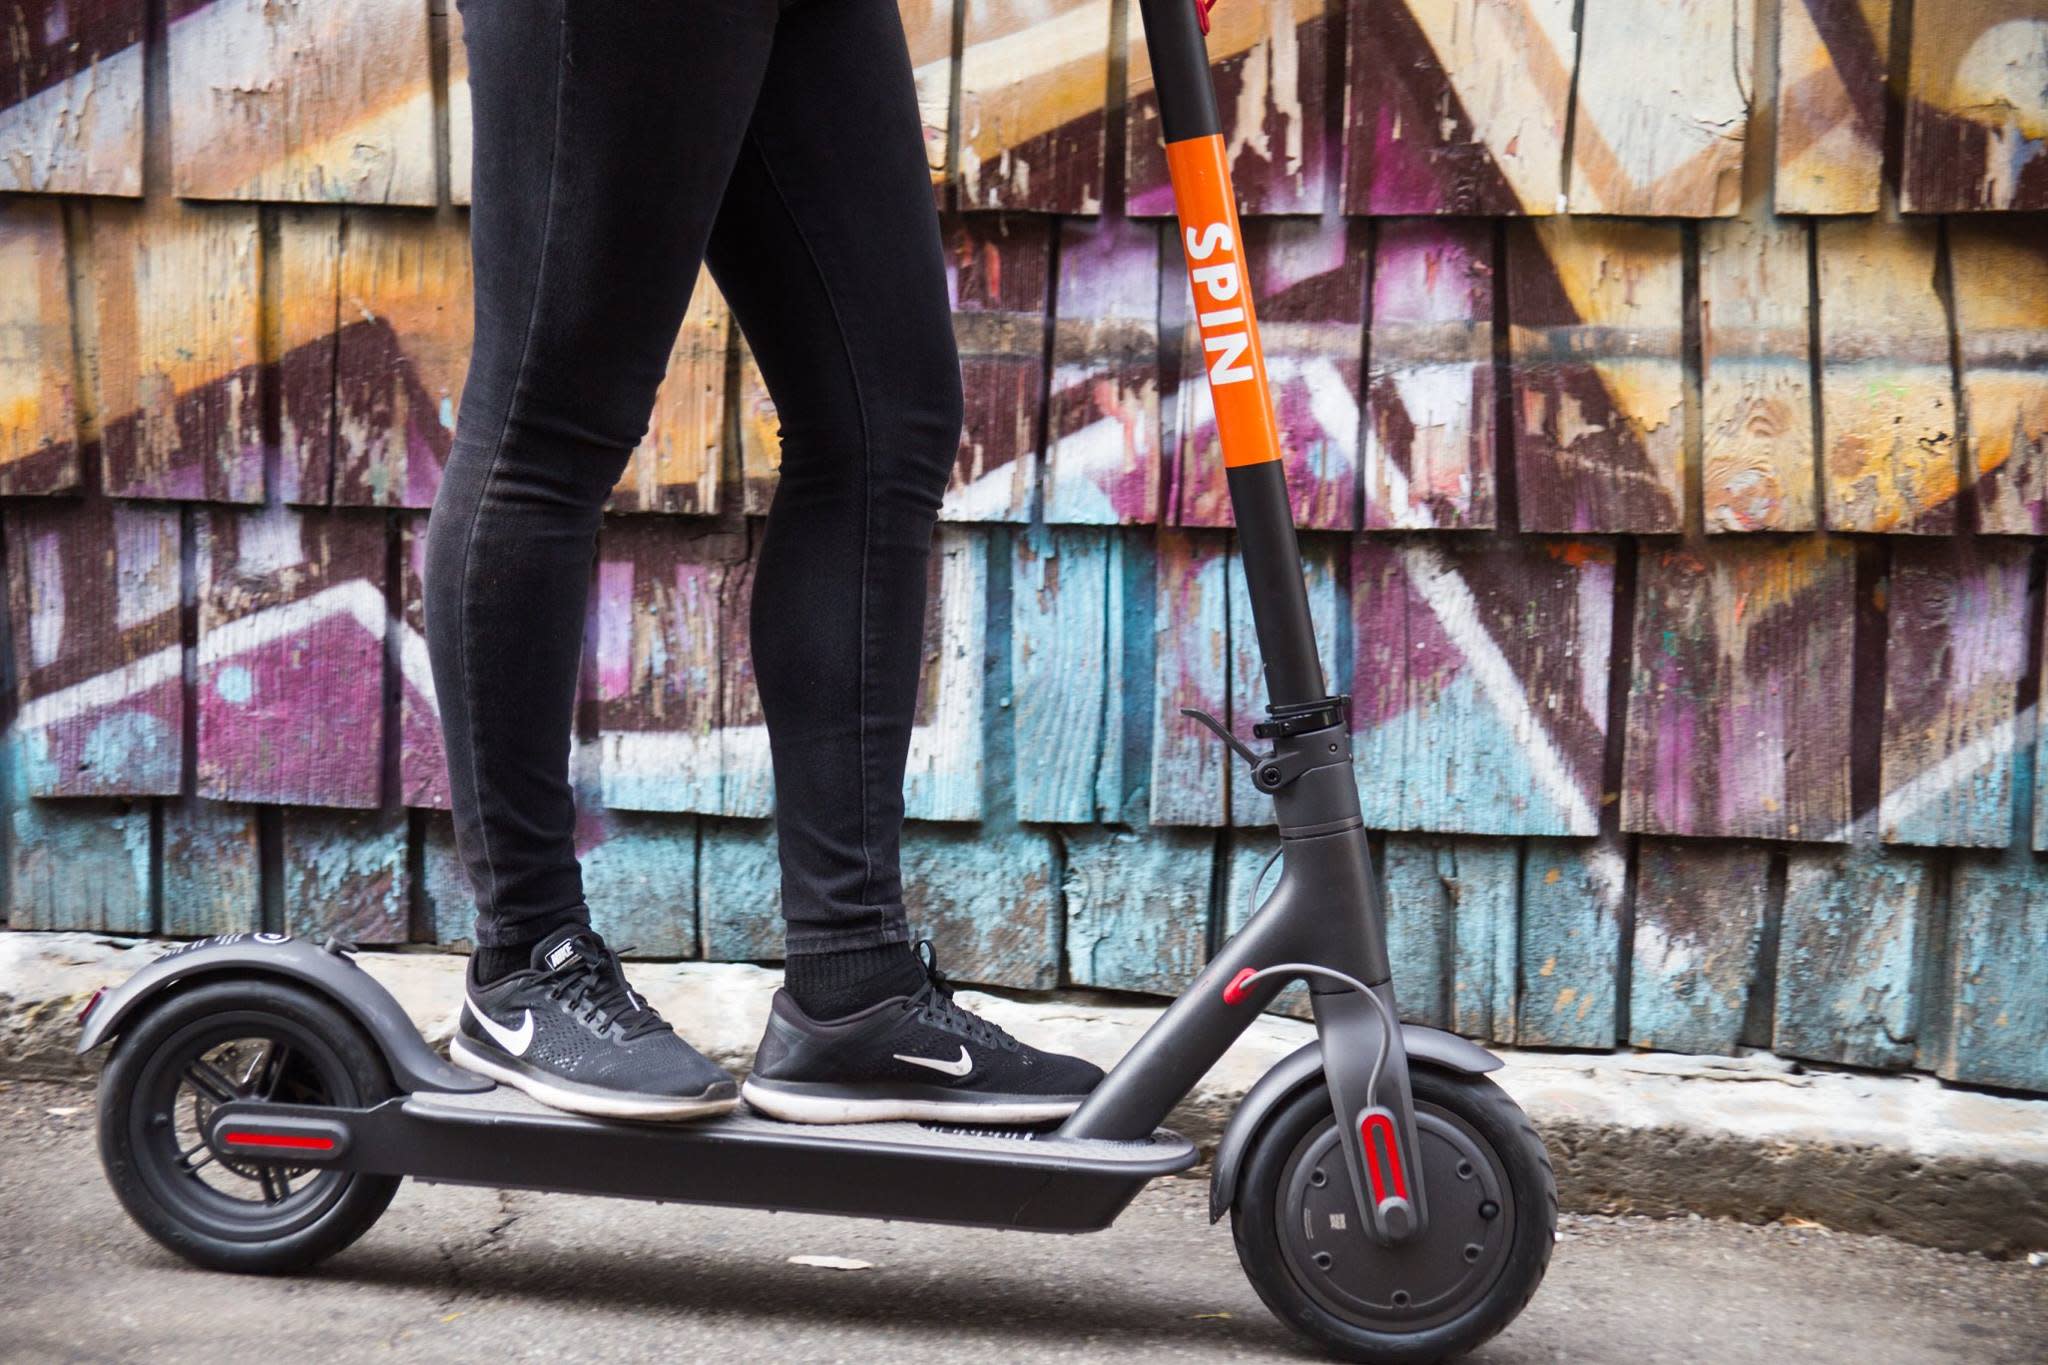 spin electric scooter